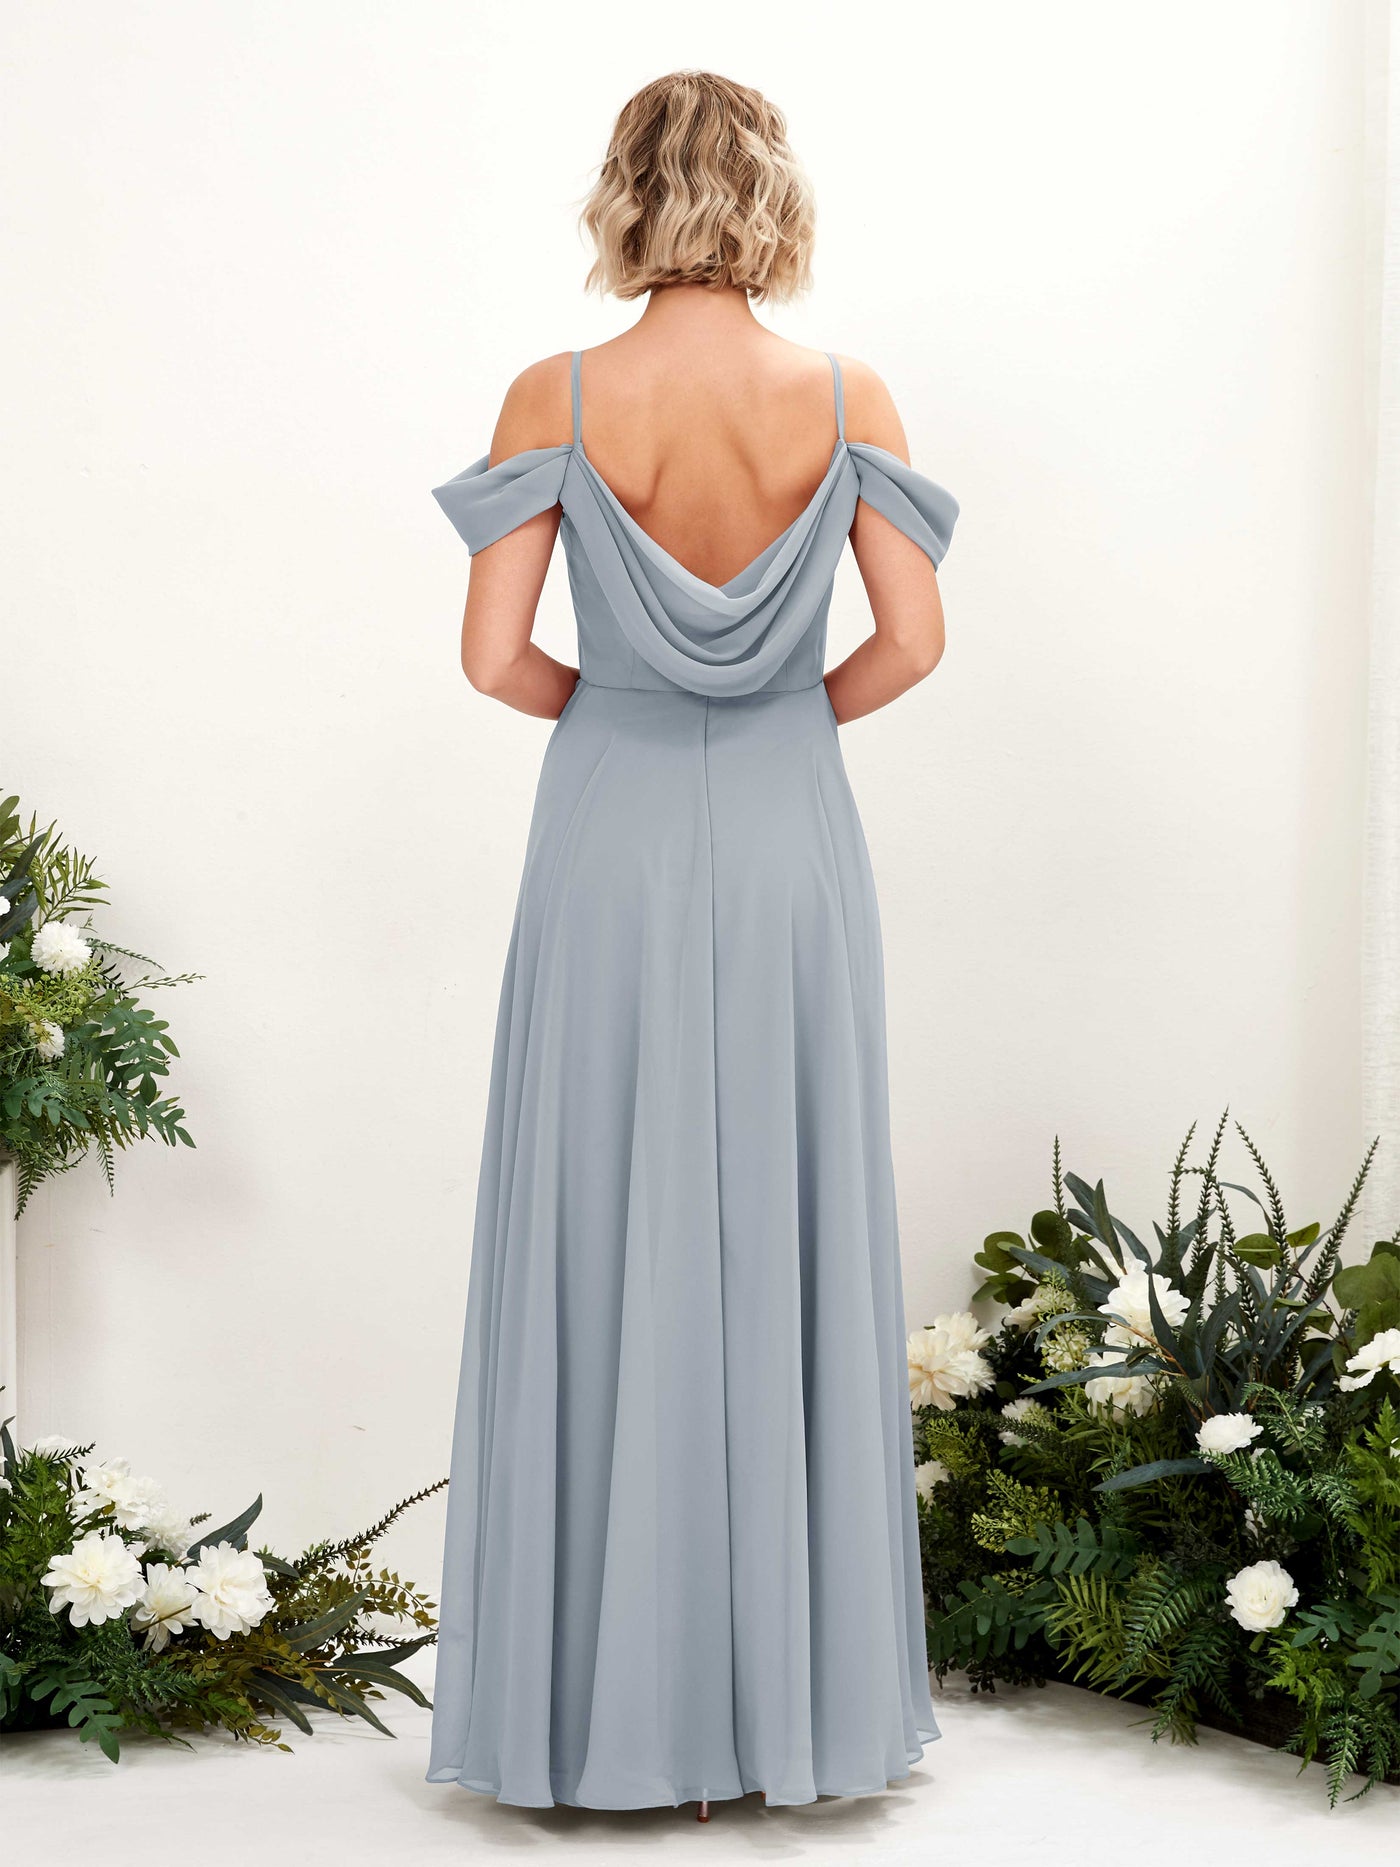 Dusty Blue-Upgrade Bridesmaid Dresses Bridesmaid Dress A-line Chiffon Off Shoulder Full Length Sleeveless Wedding Party Dress (81224904)#color_dusty-blue-upgrade